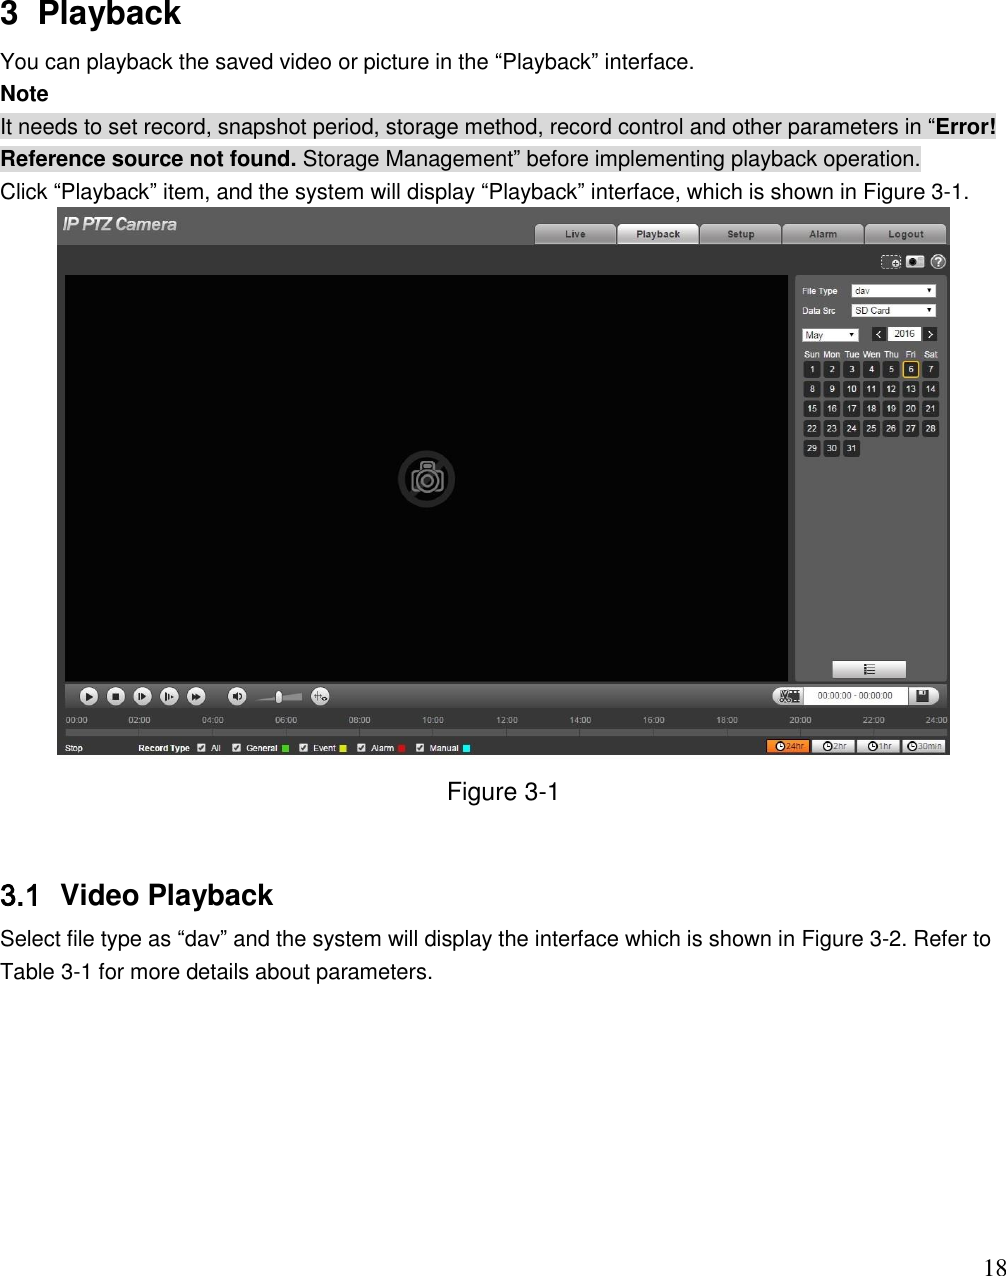                                                                              18 3  Playback You can playback the saved video or picture in the “Playback” interface.  Note It needs to set record, snapshot period, storage method, record control and other parameters in “Error! Reference source not found. Storage Management” before implementing playback operation.  Click “Playback” item, and the system will display “Playback” interface, which is shown in Figure 3-1.   Figure 3-1  3.1  Video Playback  Select file type as “dav” and the system will display the interface which is shown in Figure 3-2. Refer to Table 3-1 for more details about parameters. 